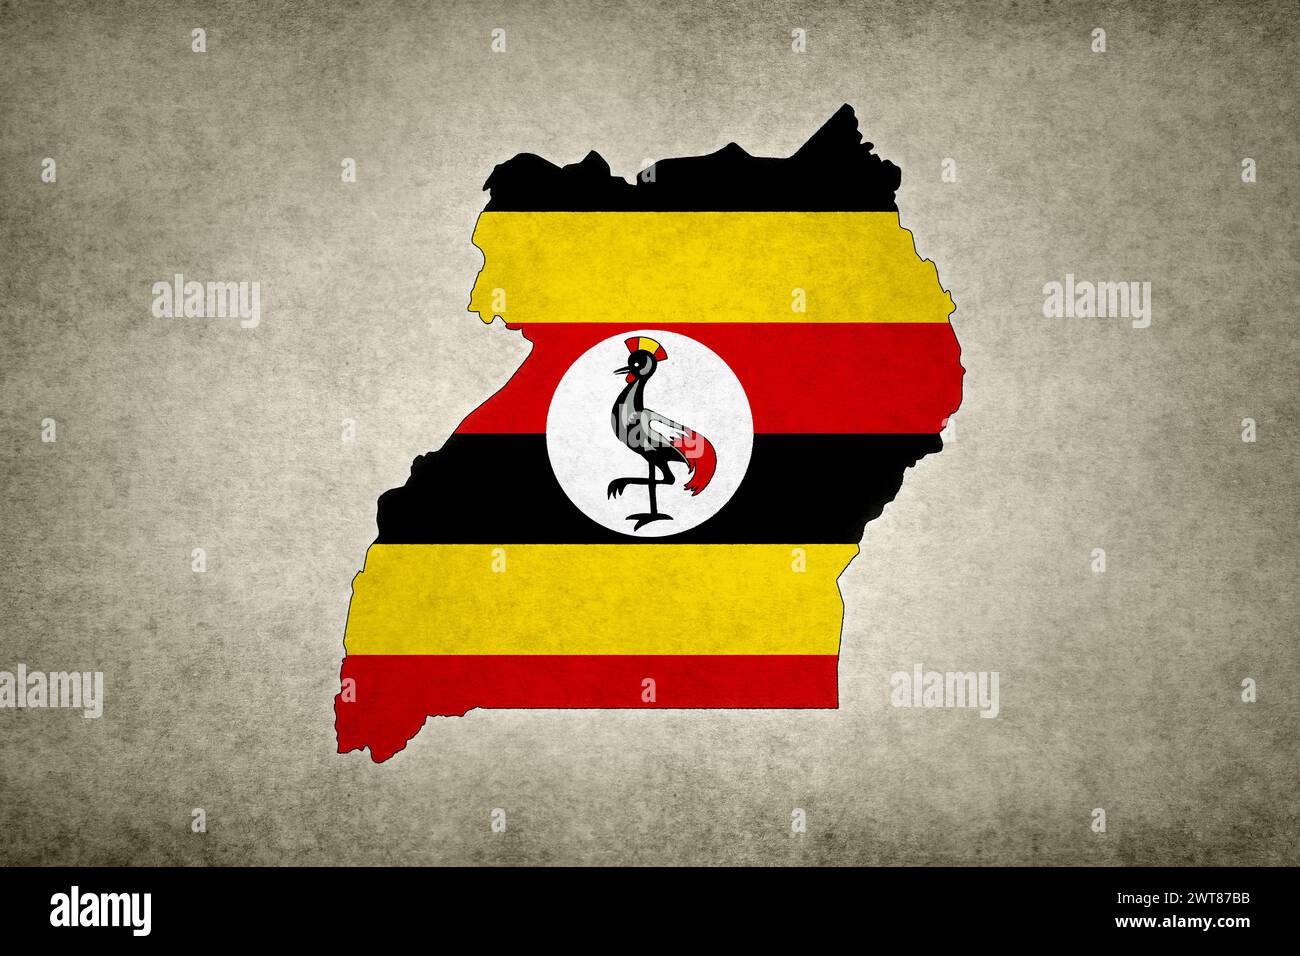 Grunge map of Uganda with its flag printed within its border on an old paper. Stock Photo